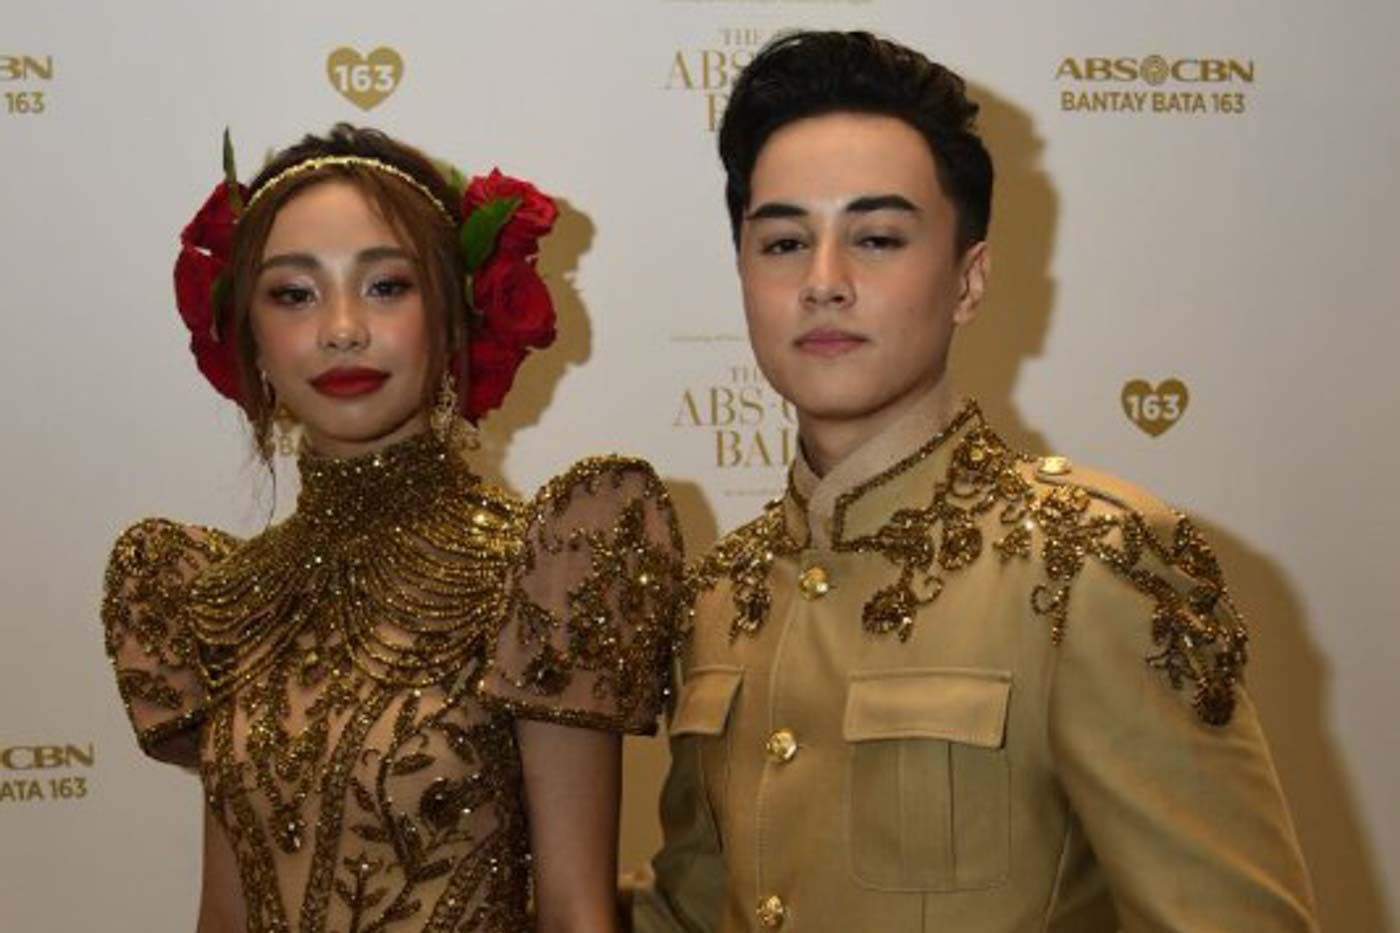 LOOK: Maymay Entrata’s look at the ABS-CBN Ball 2019 is giving us life